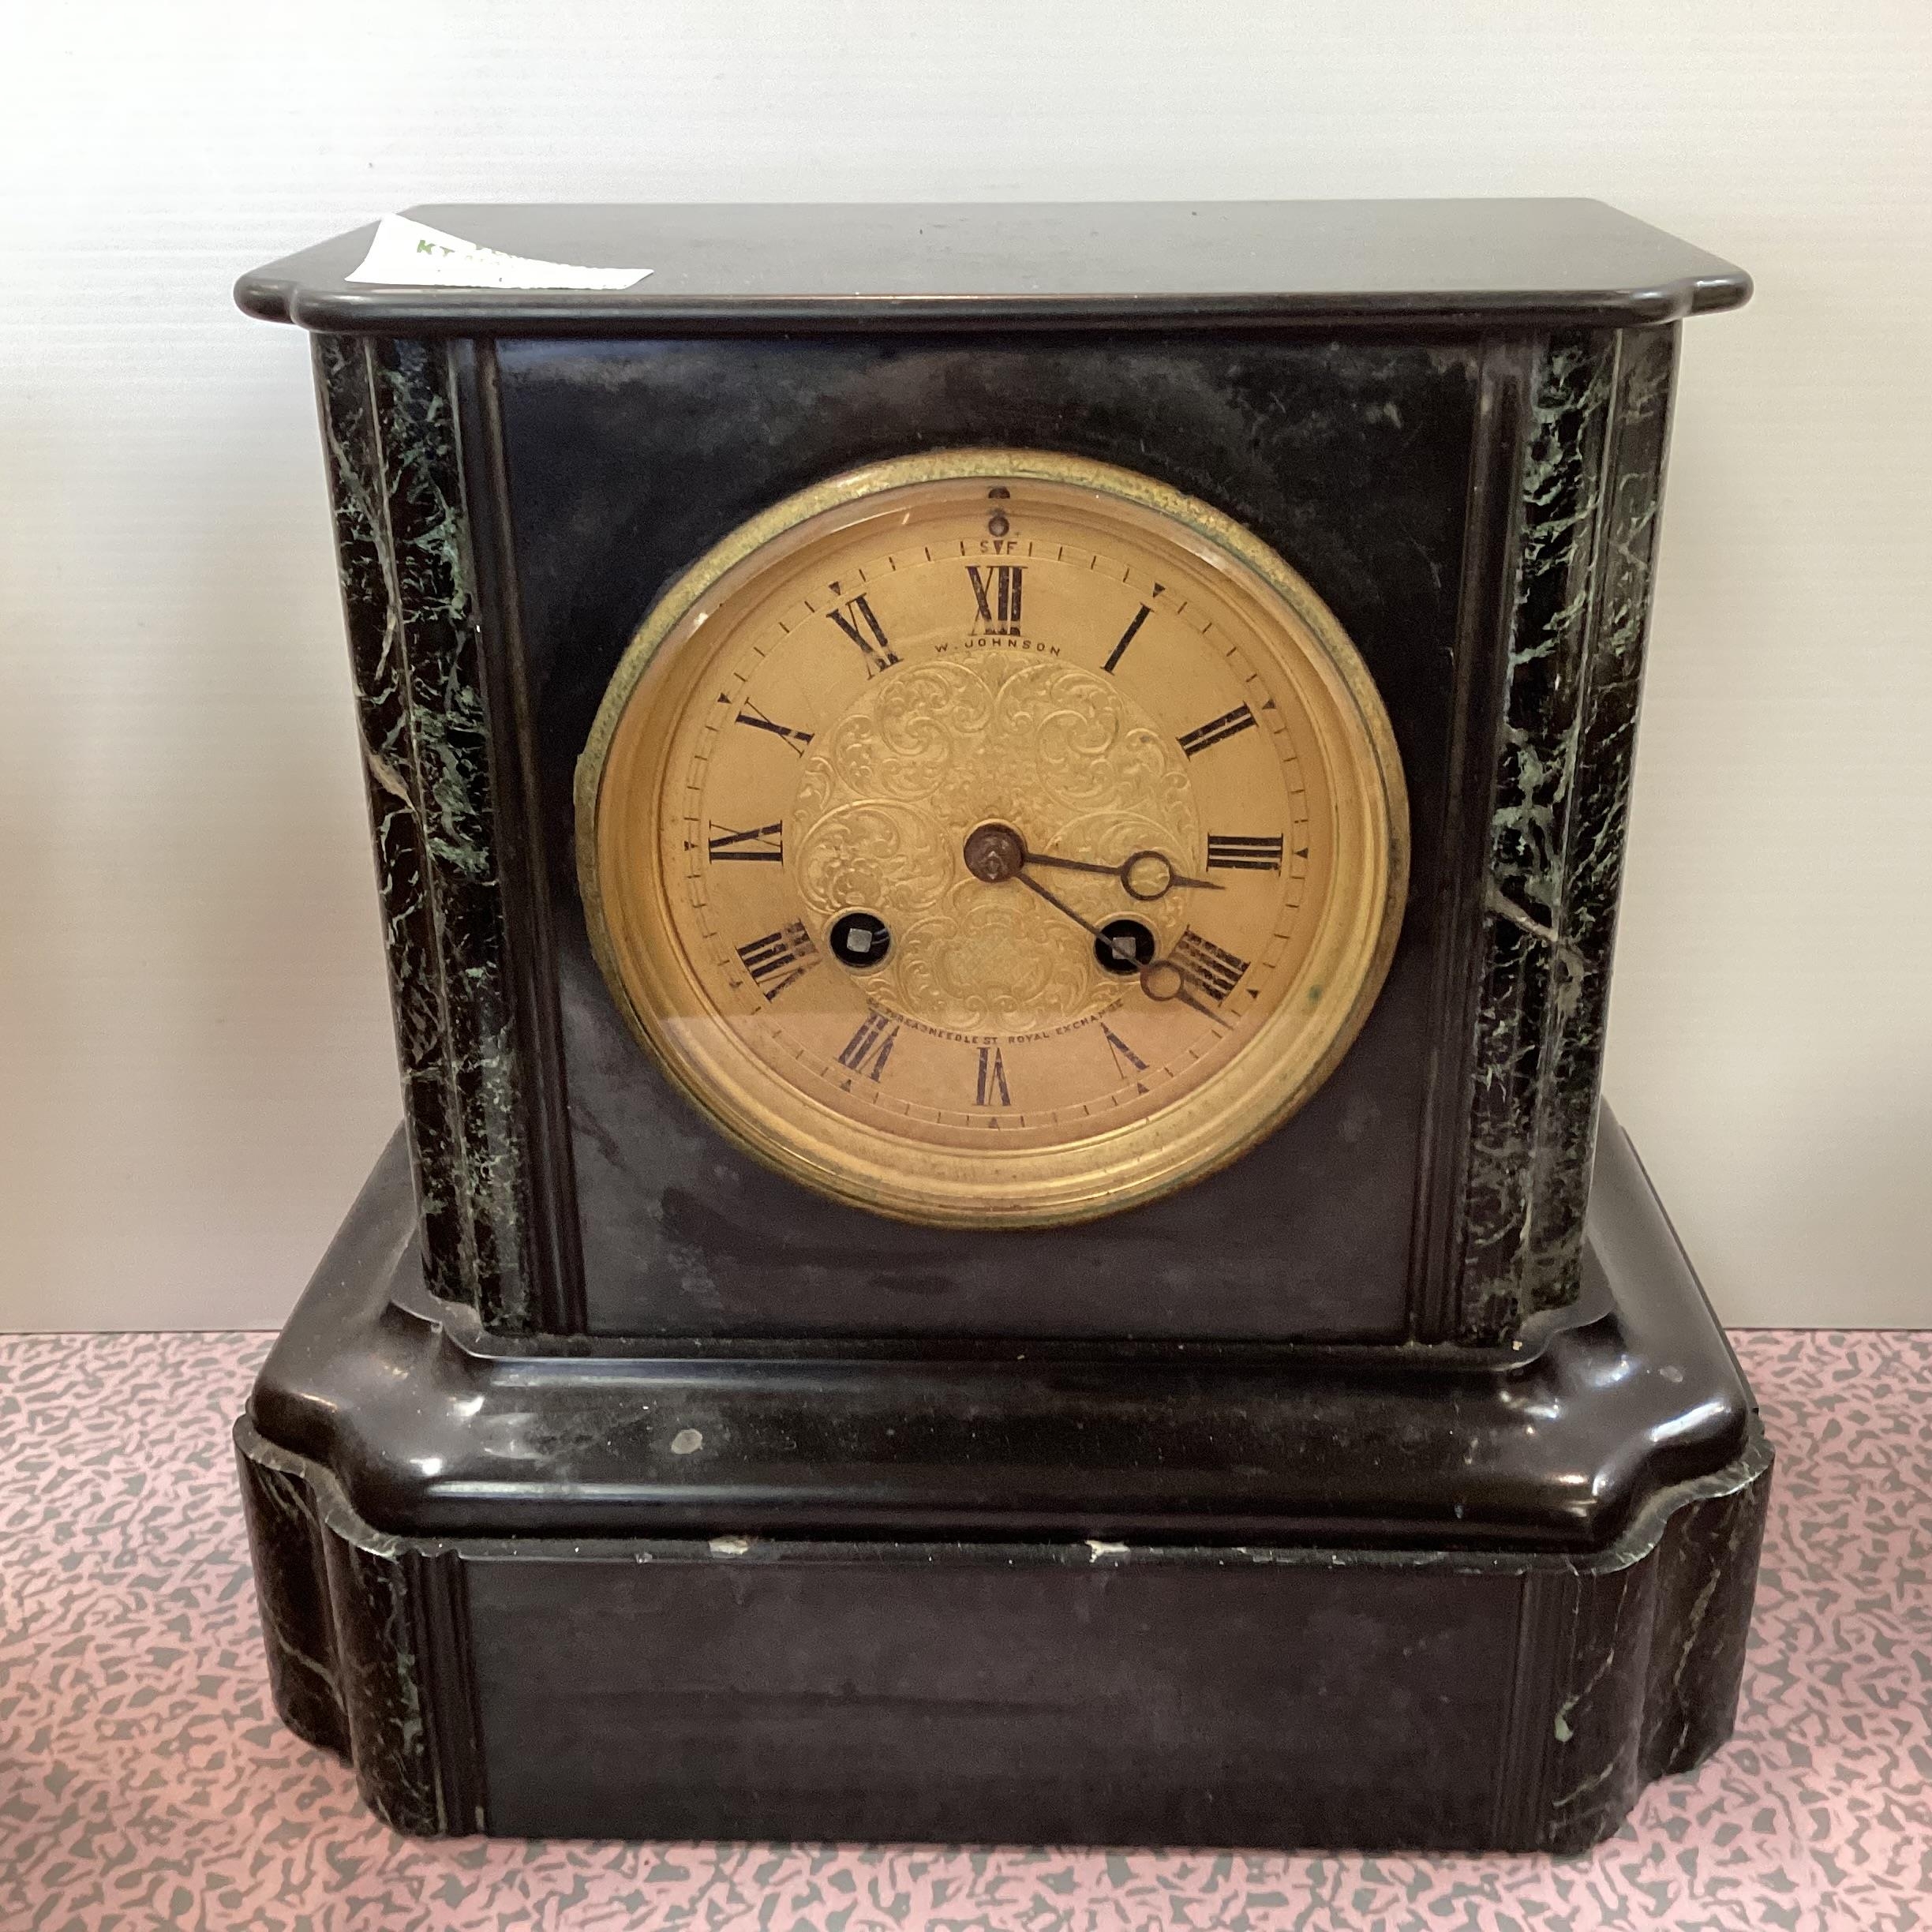 Black late mantel clock; and a clock works movement; and a pamphlet on clock hands, all as found; - Image 6 of 7